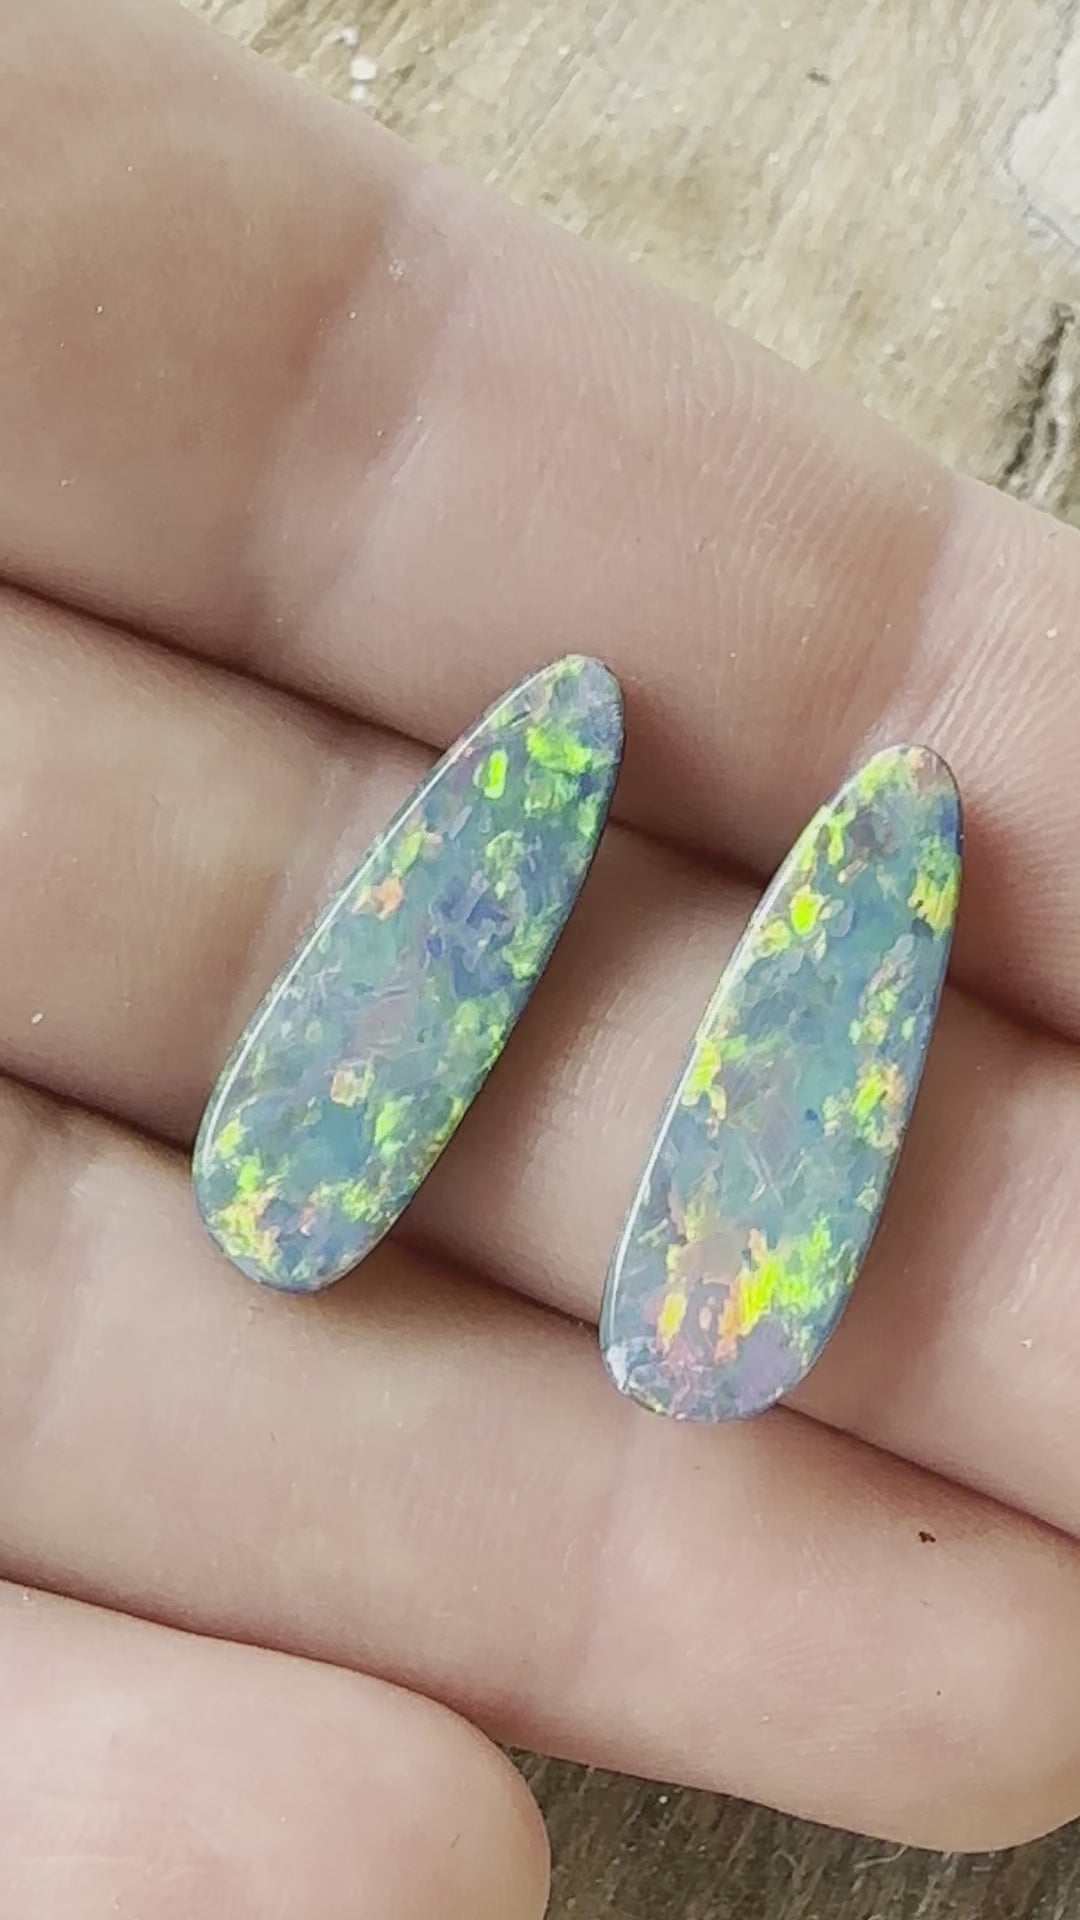 Brilliant matching opal doublets